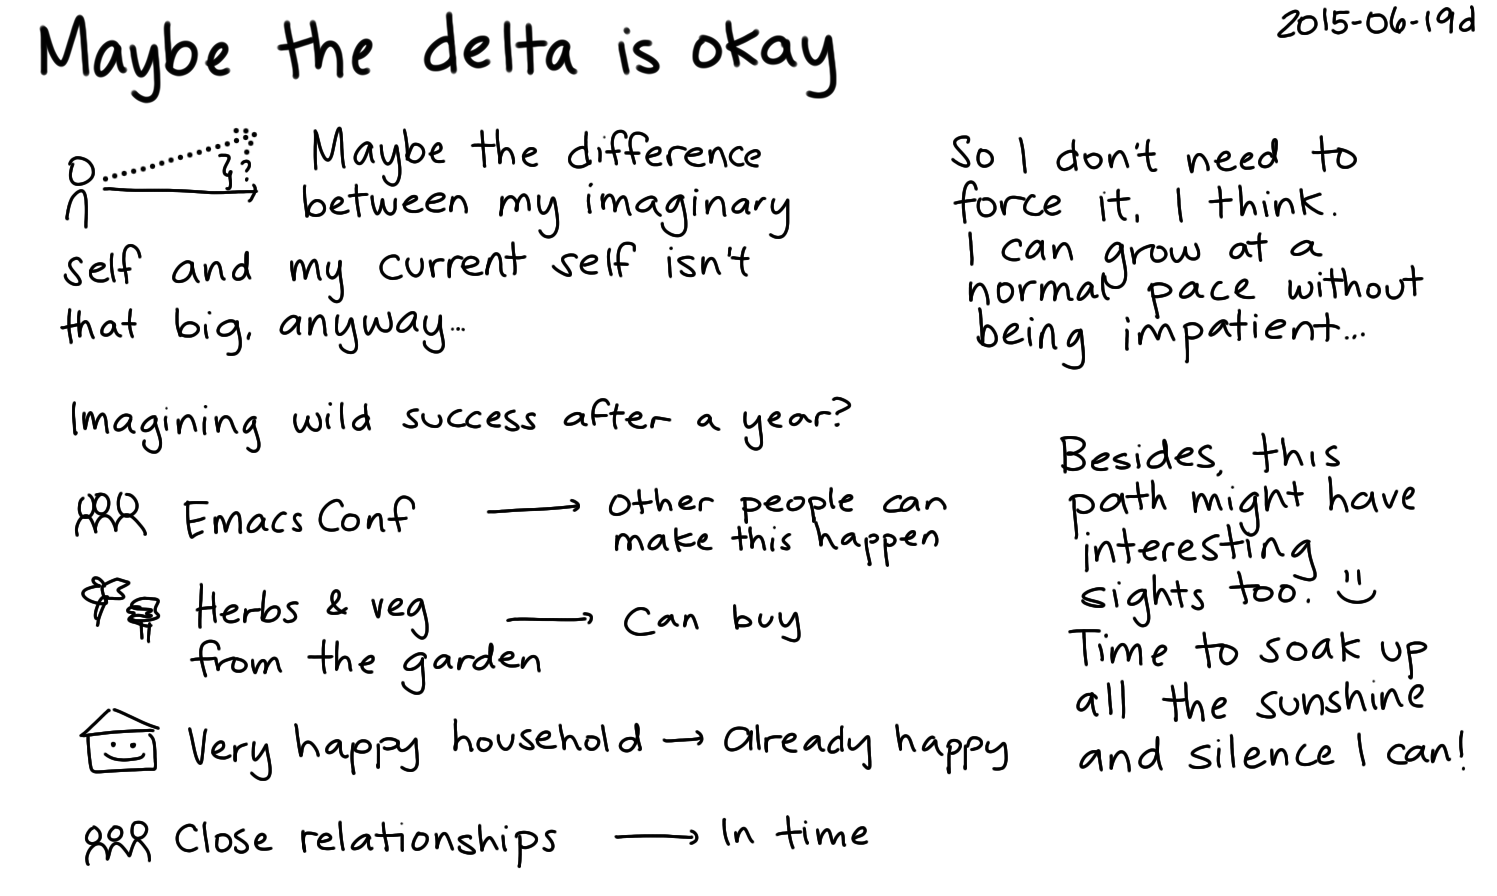 2015-06-19d Maybe the delta is okay -- index card #gap #mindset.png